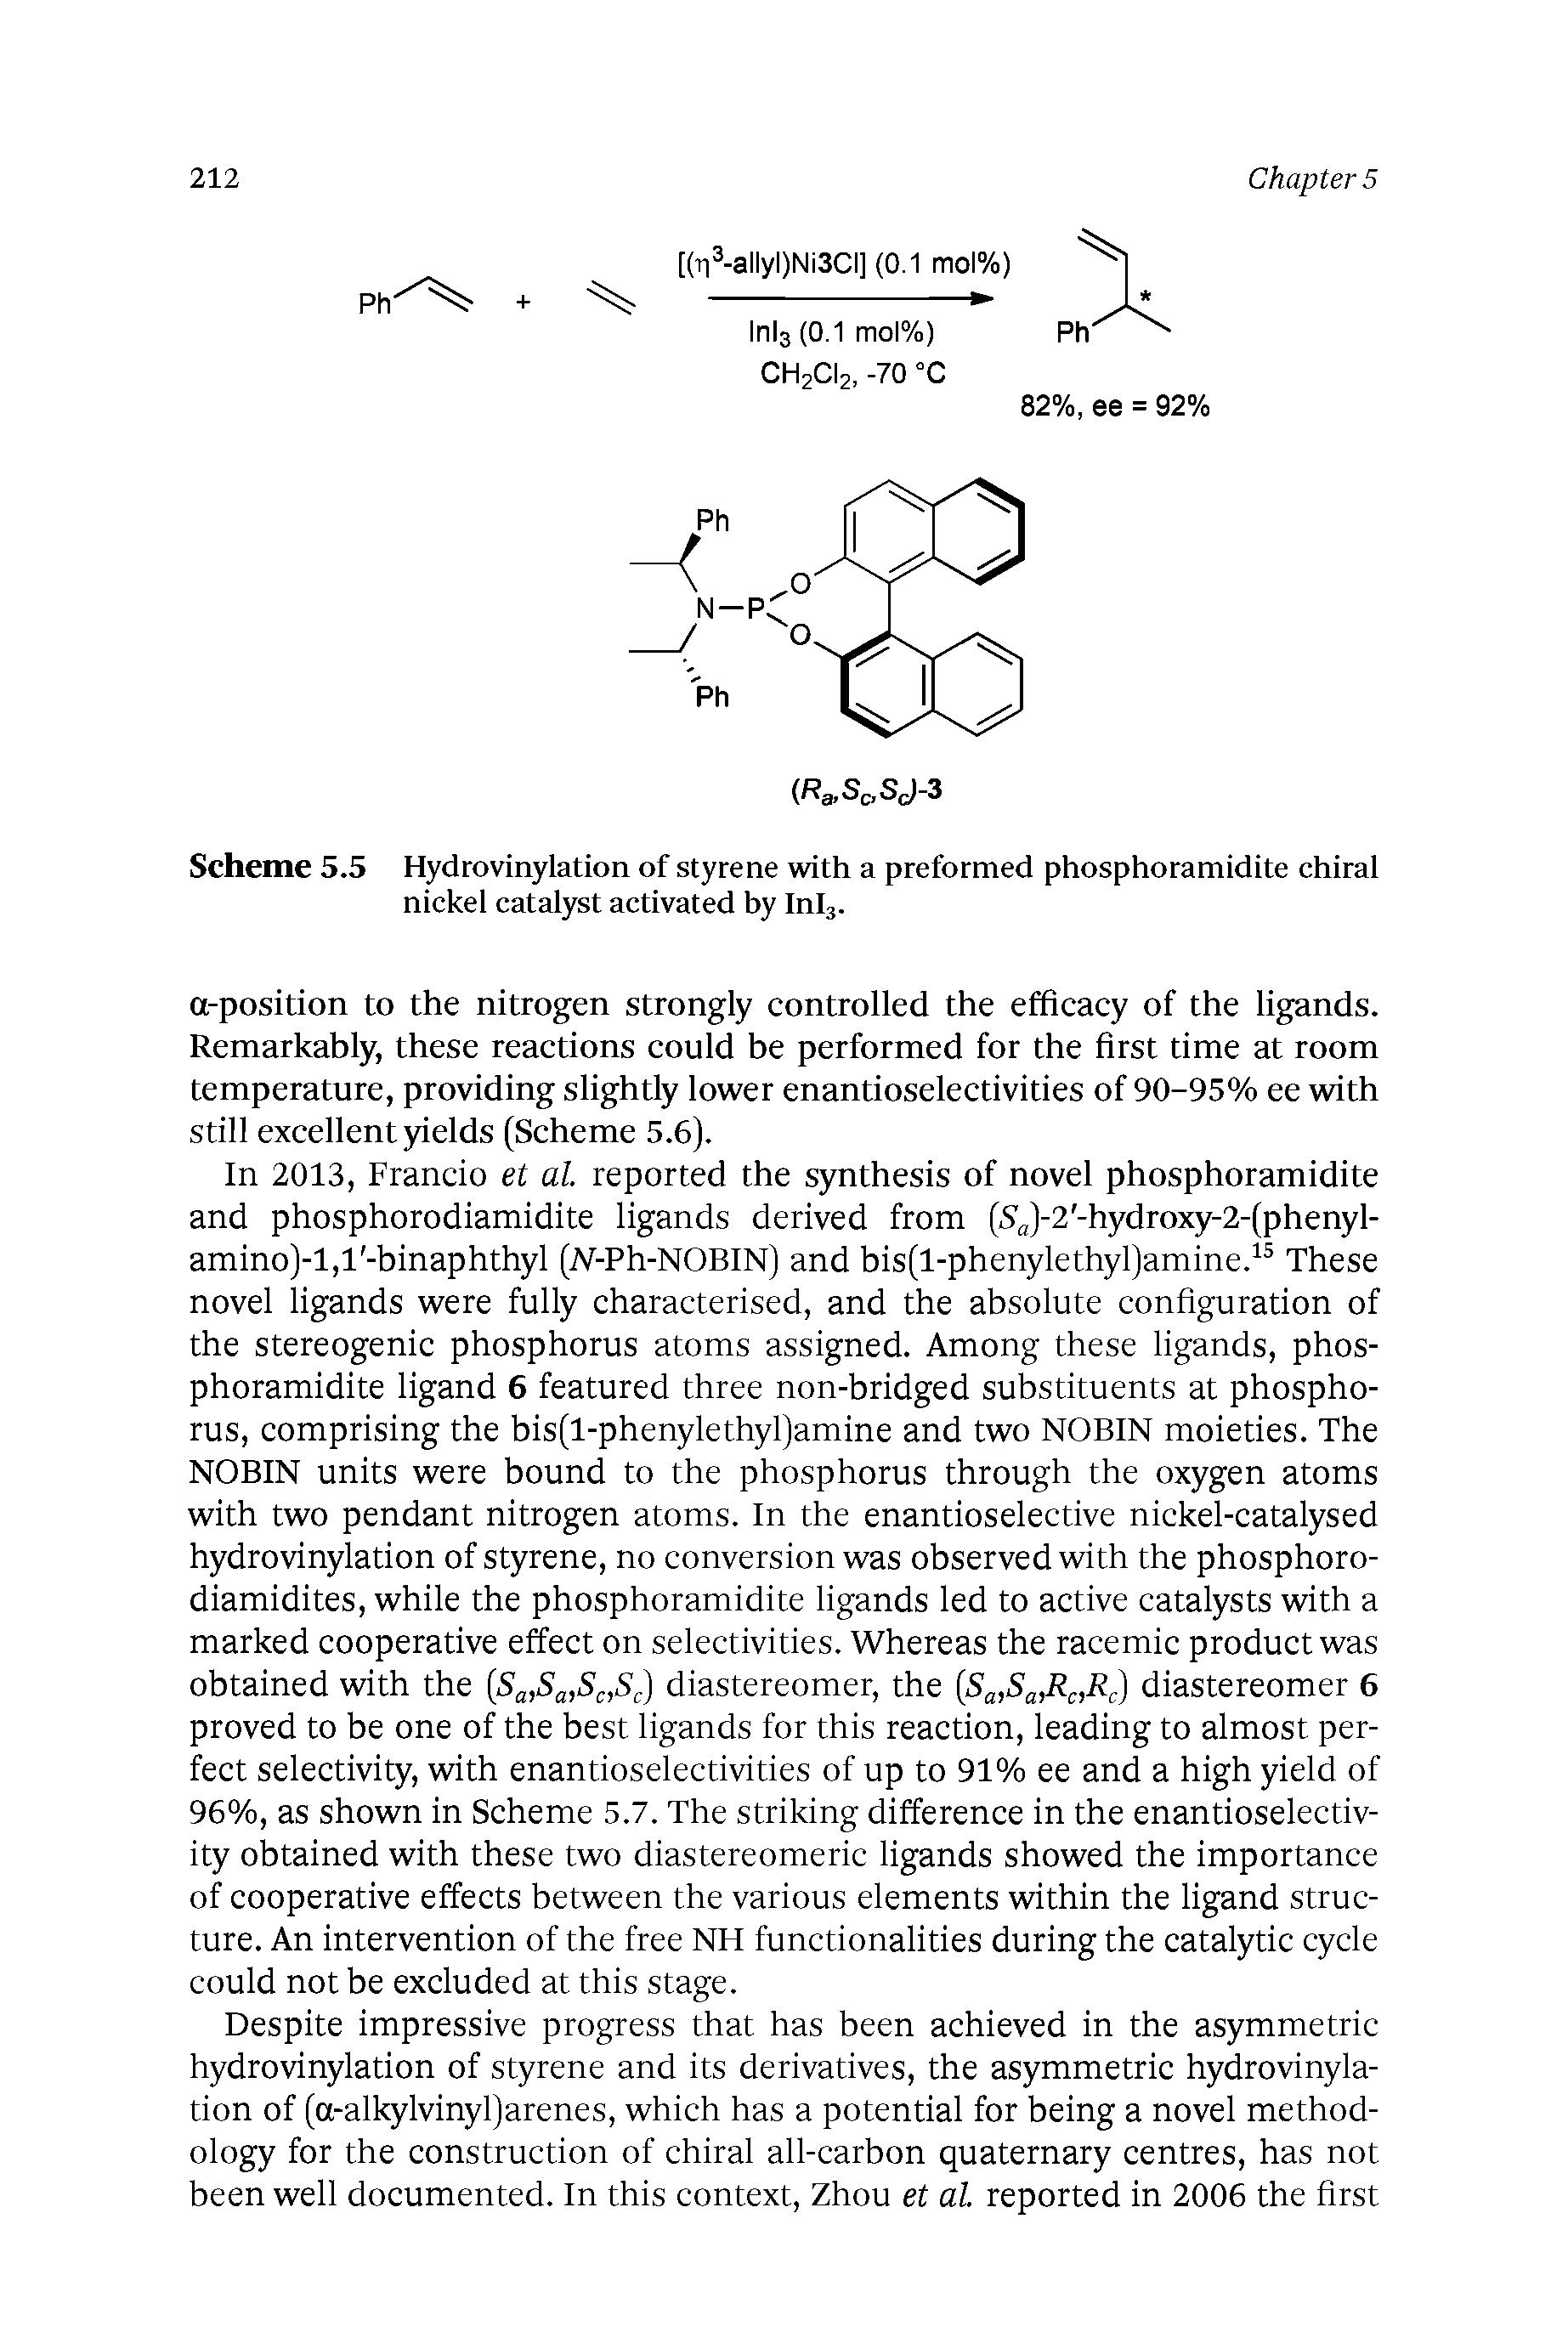 Scheme 5.5 Hydrovinylation of styrene with a preformed phosphoramidite chiral nickel catalyst activated by Inlj.